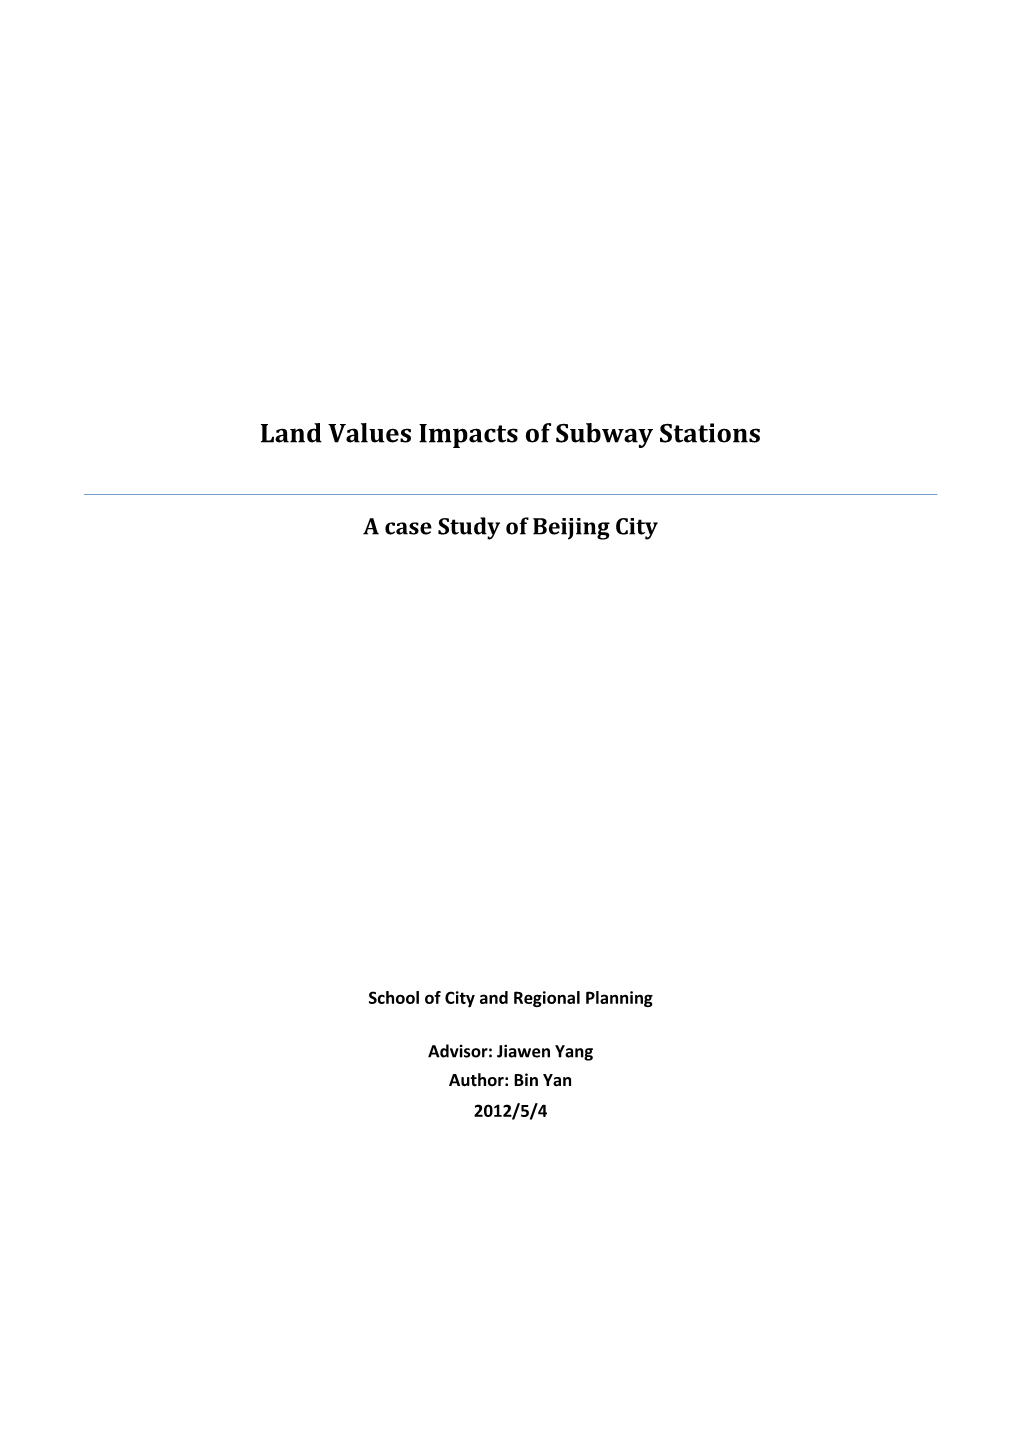 Land Values Impacts of Subway Stations